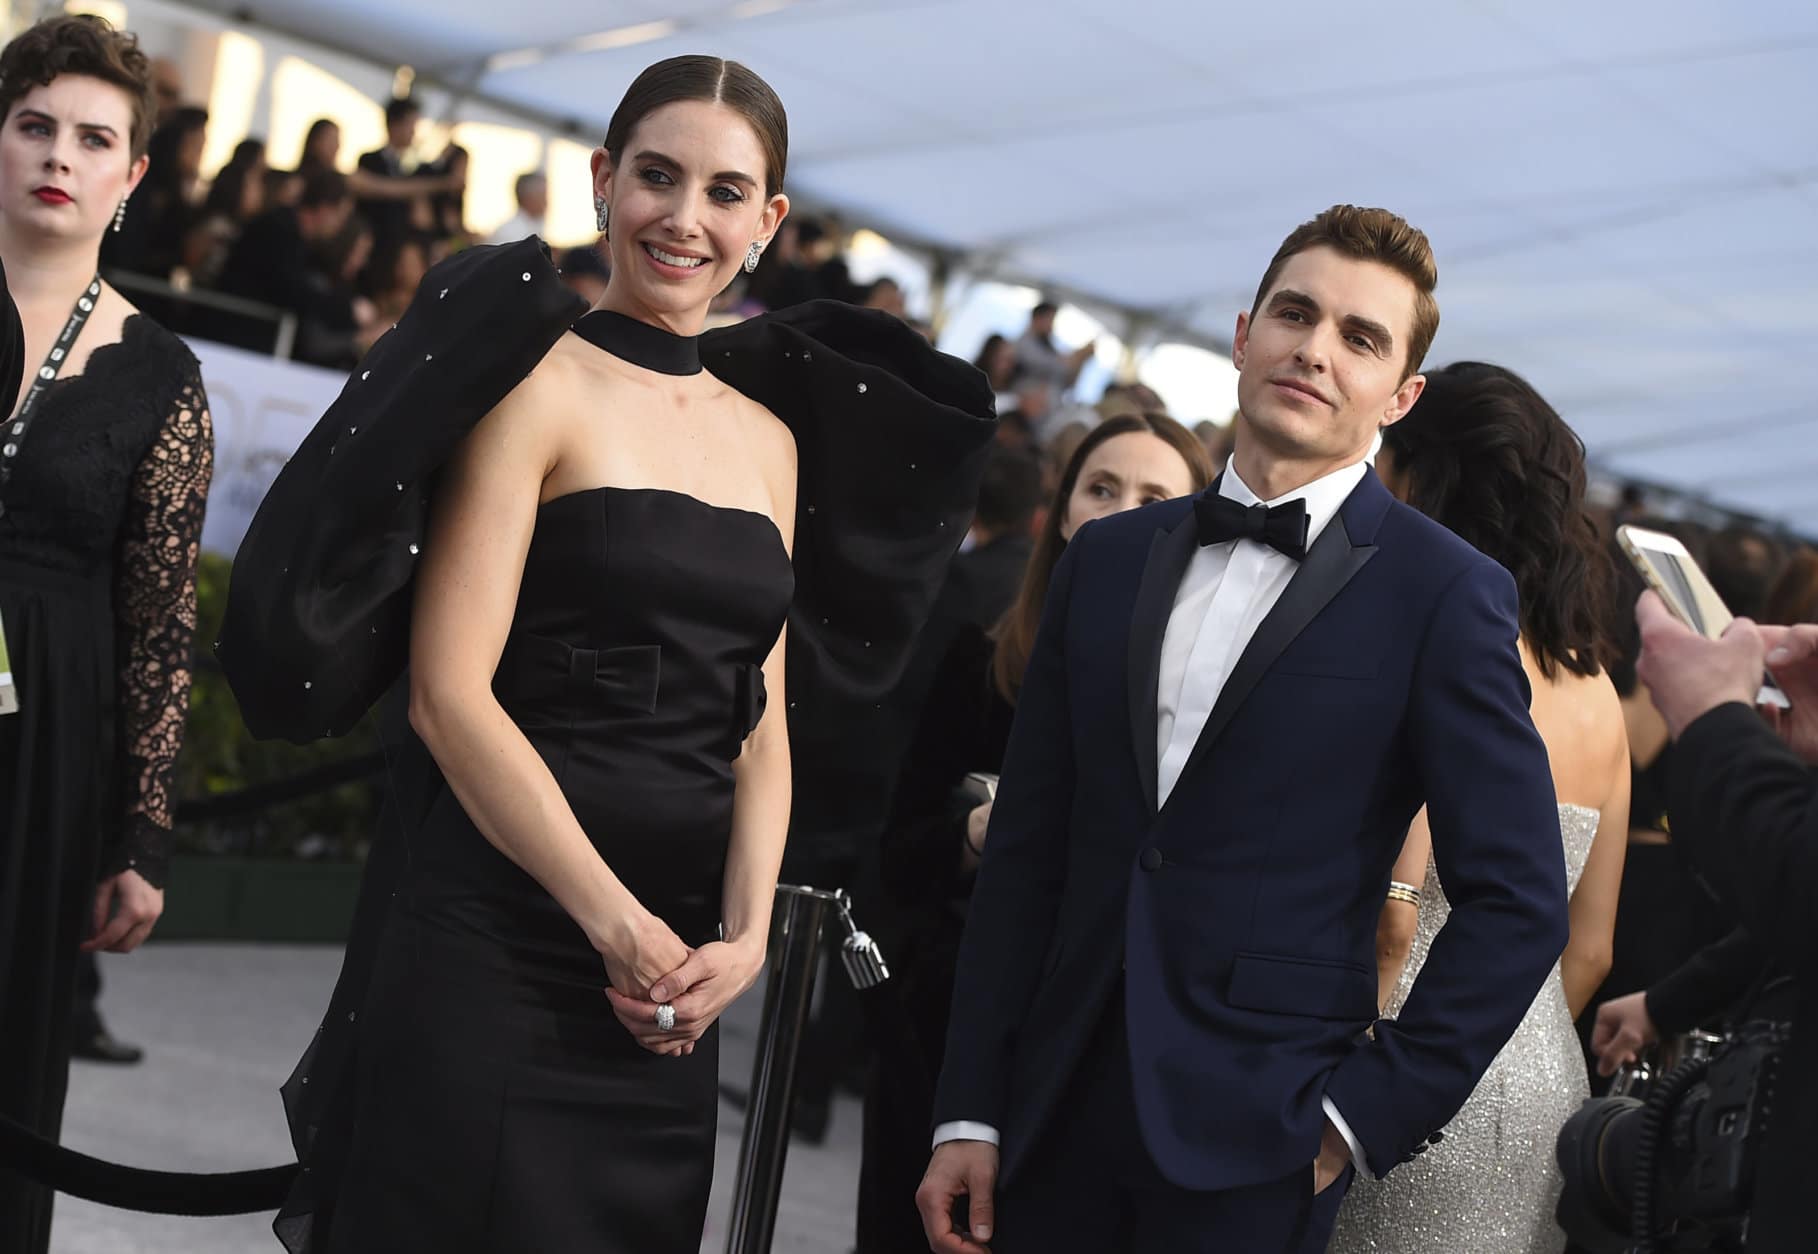 Alison Brie, left, and Dave Franco arrive at the 25th annual Screen Actors Guild Awards at the Shrine Auditorium &amp; Expo Hall on Sunday, Jan. 27, 2019, in Los Angeles. (Photo by Jordan Strauss/Invision/AP)